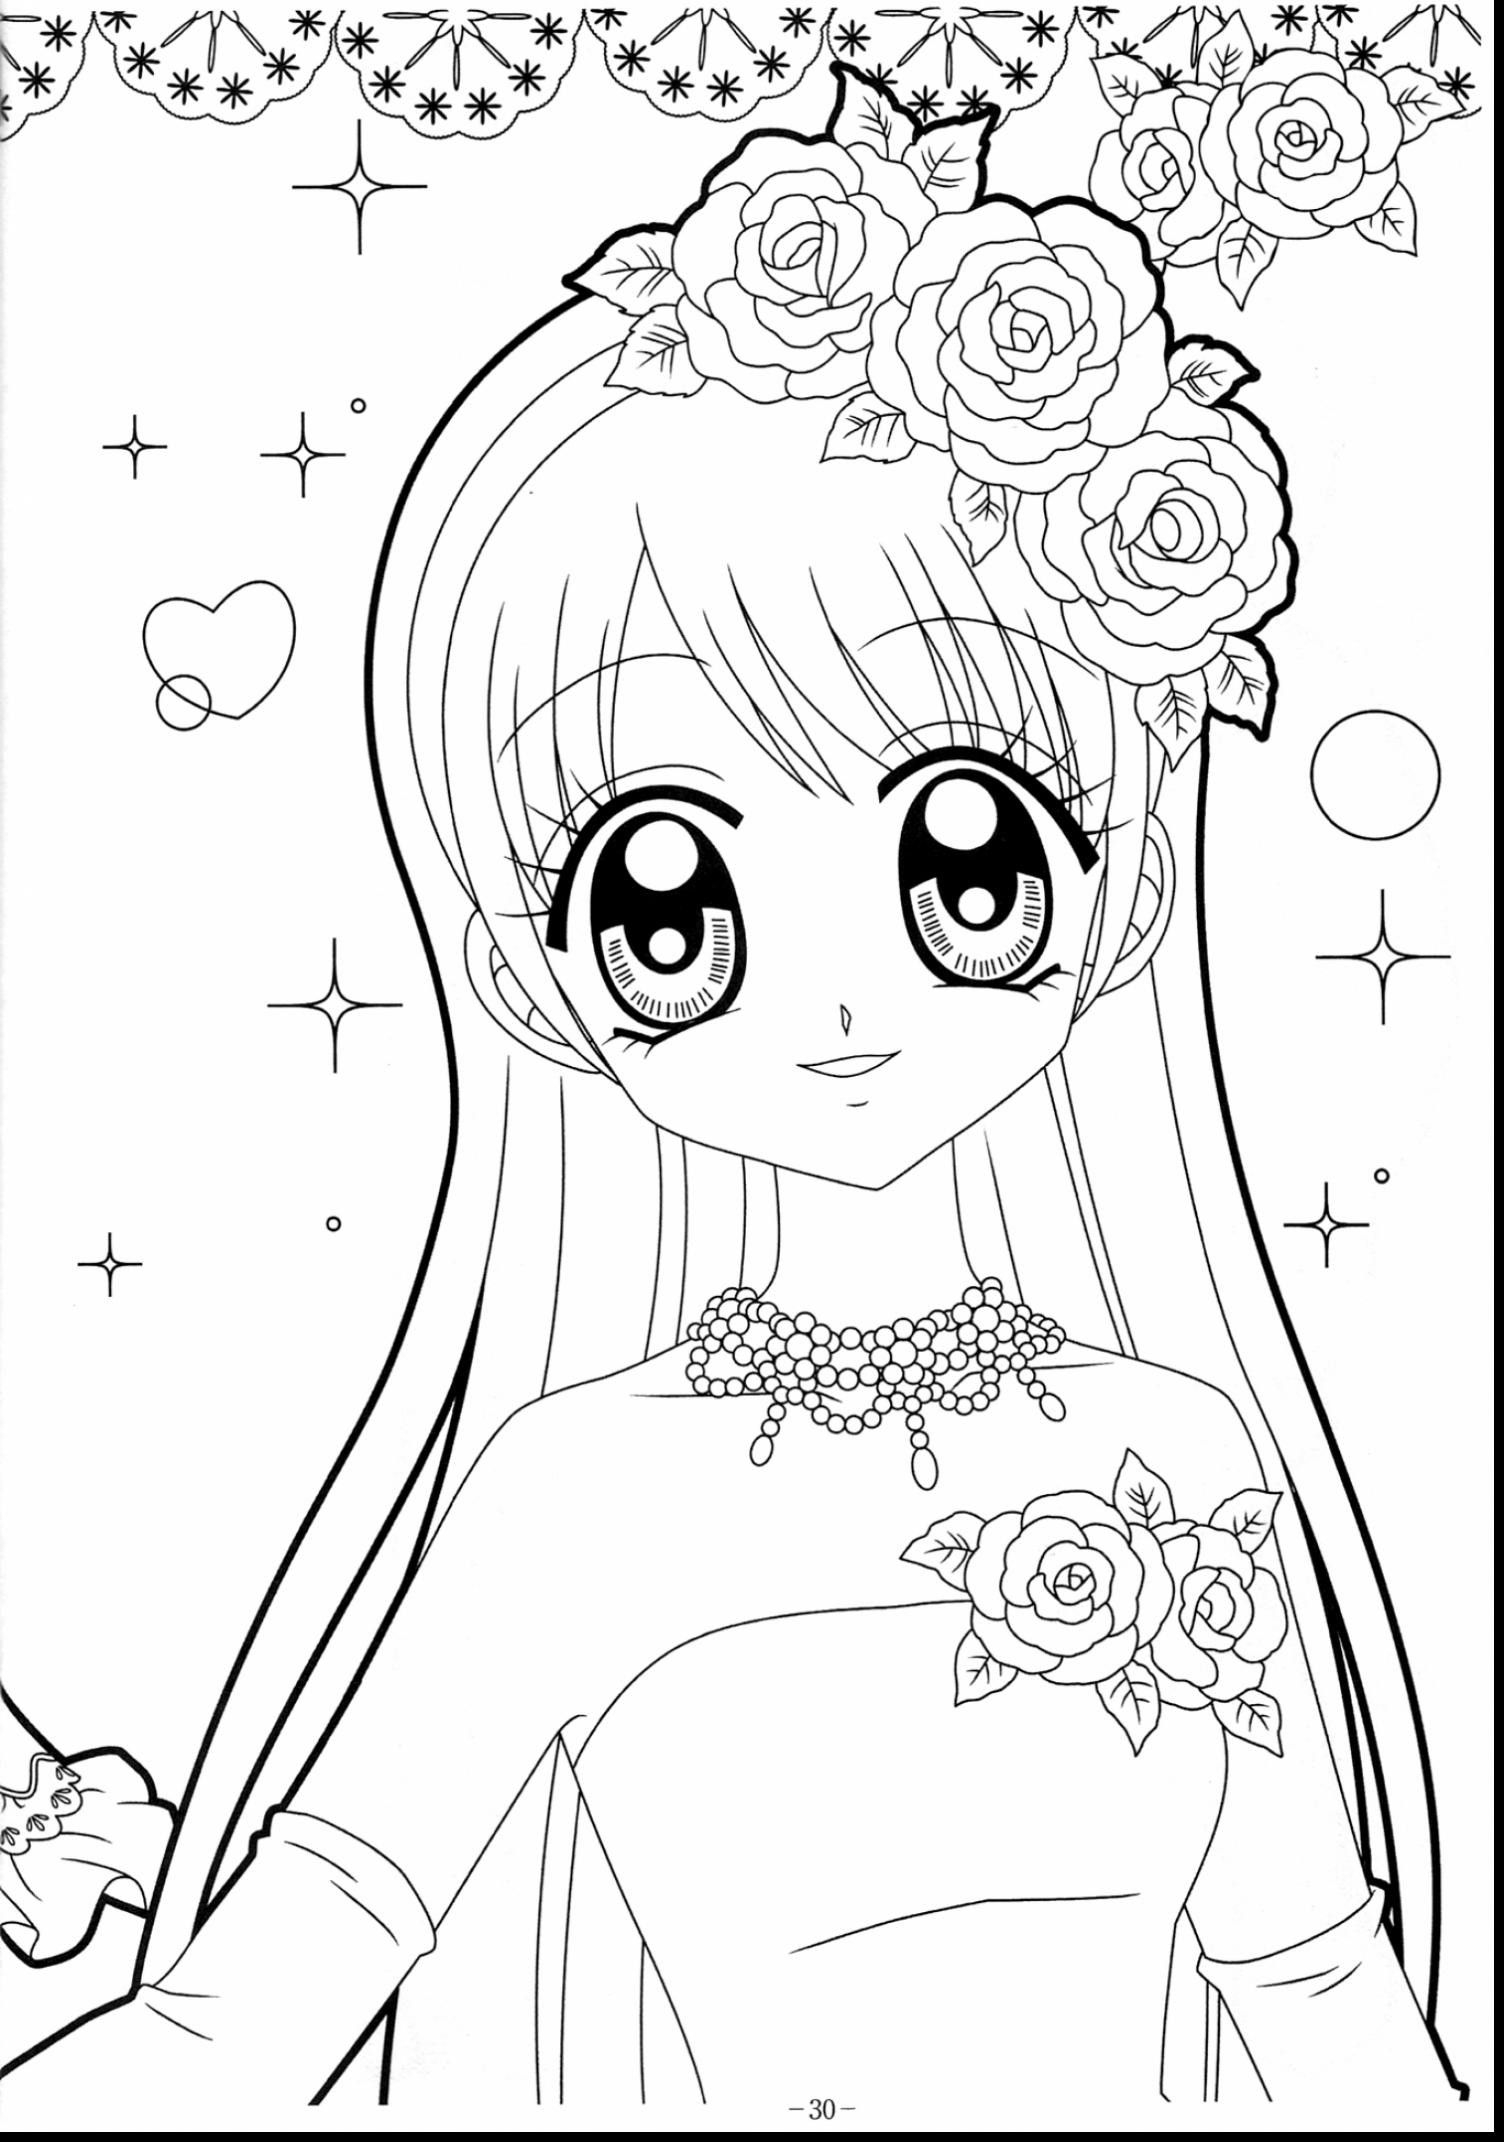 Creative Photo of Kawaii Coloring Pages - vicoms.info